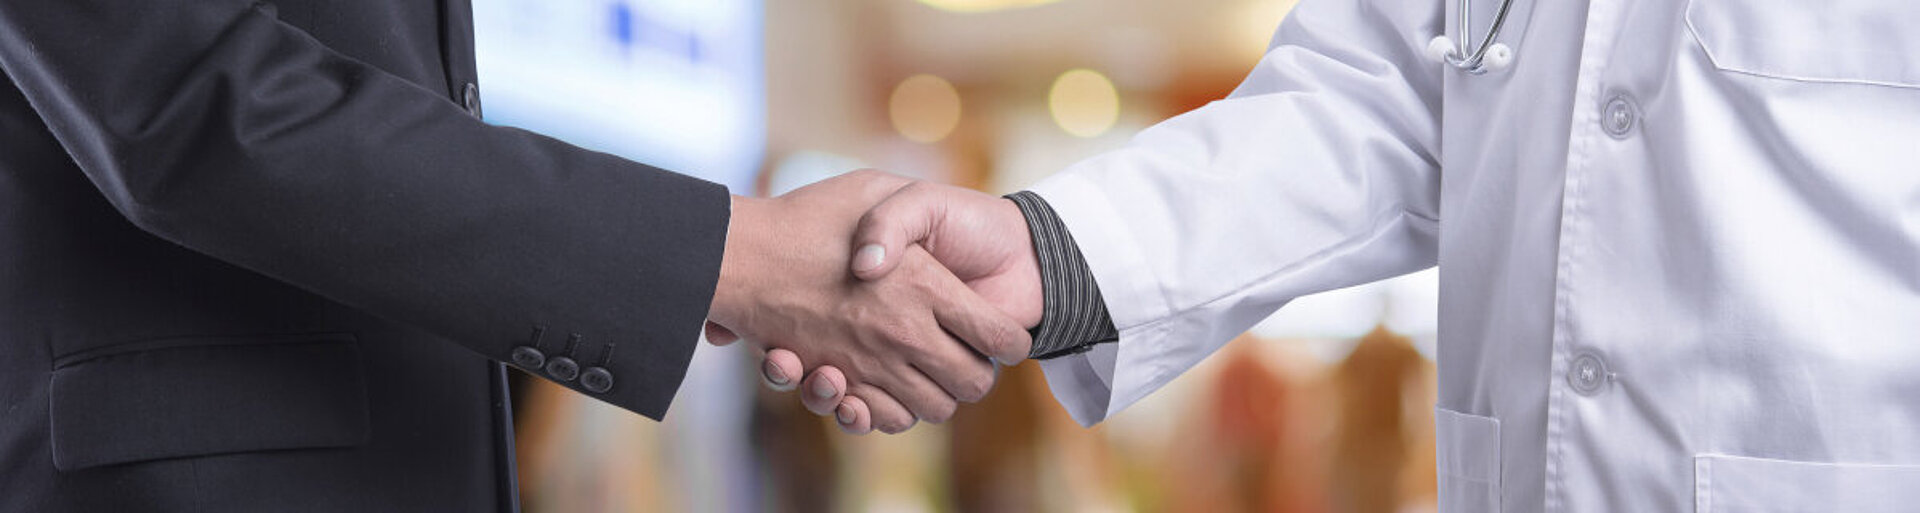 Service company: Picture showing handshake